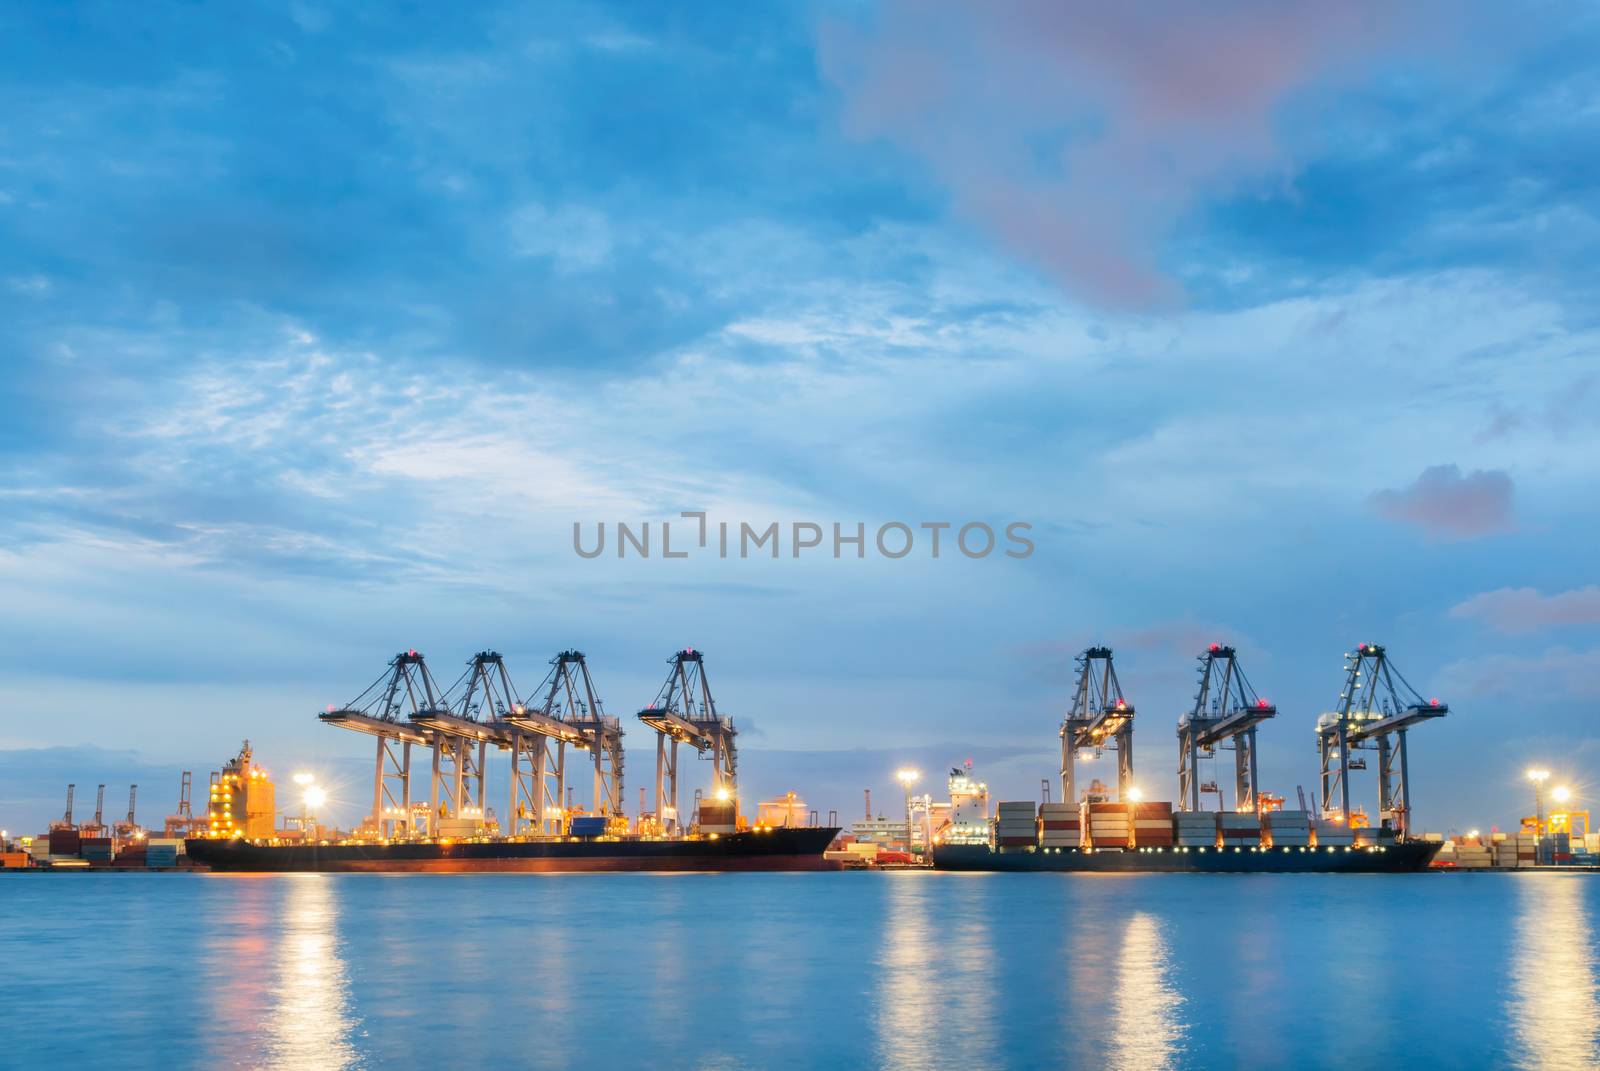 Container Cargo freight ship with working crane bridge in shipyard at dusk for Logistic Import Export background by Aunging